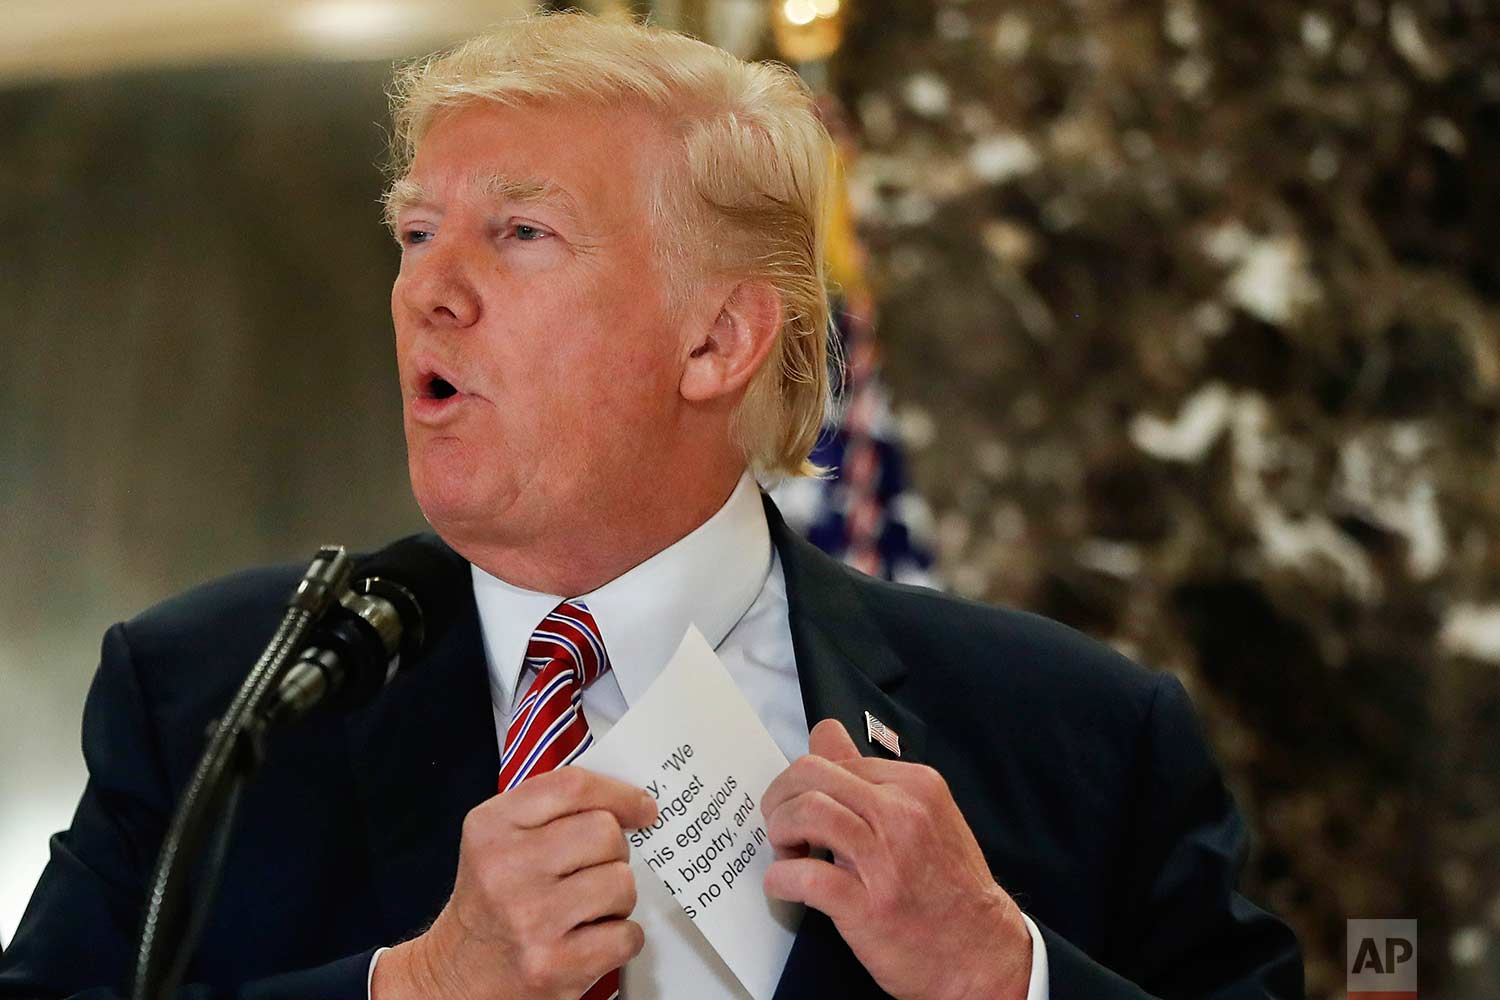  President Donald Trump reaches into his suit jacket Tuesday, Aug. 15, 2017 to read a quote he made on Saturday, Aug. 12, regarding the events in Charlottesville, Va., as he speaks to the media in the lobby of Trump Tower in New York. (AP Photo/Pablo